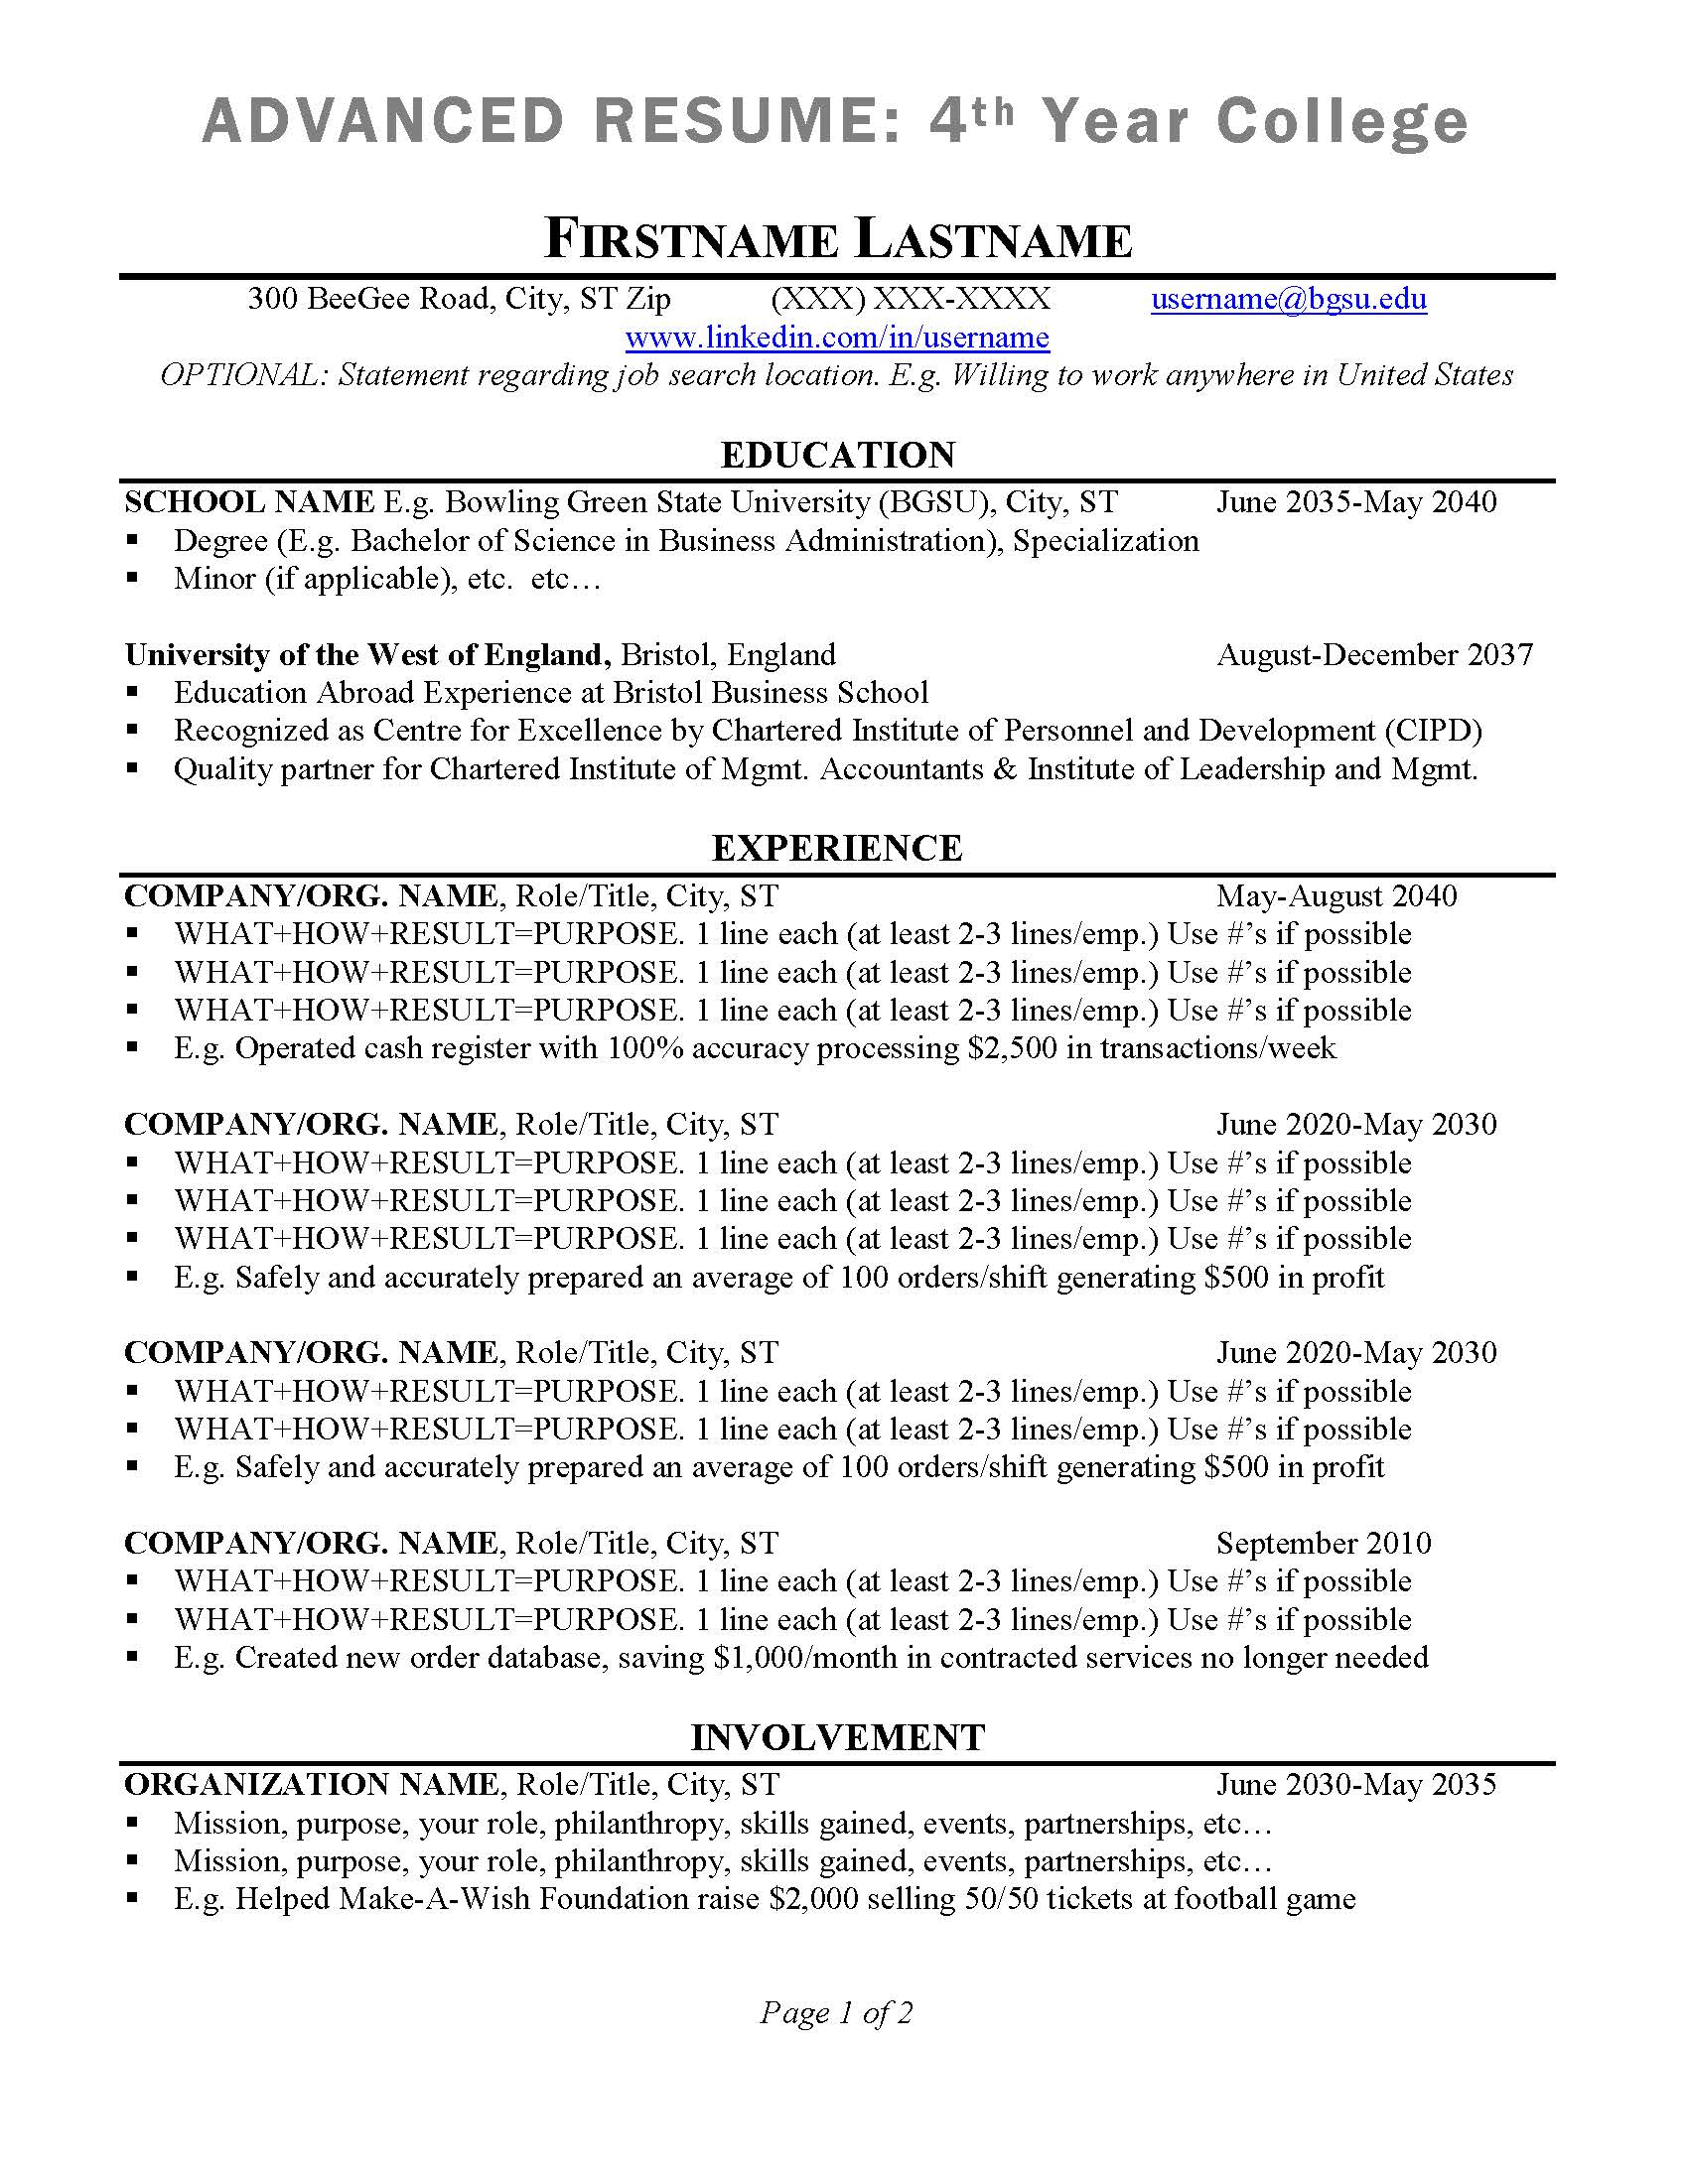 ADVANCED-Resume-Outline-update-Page-1